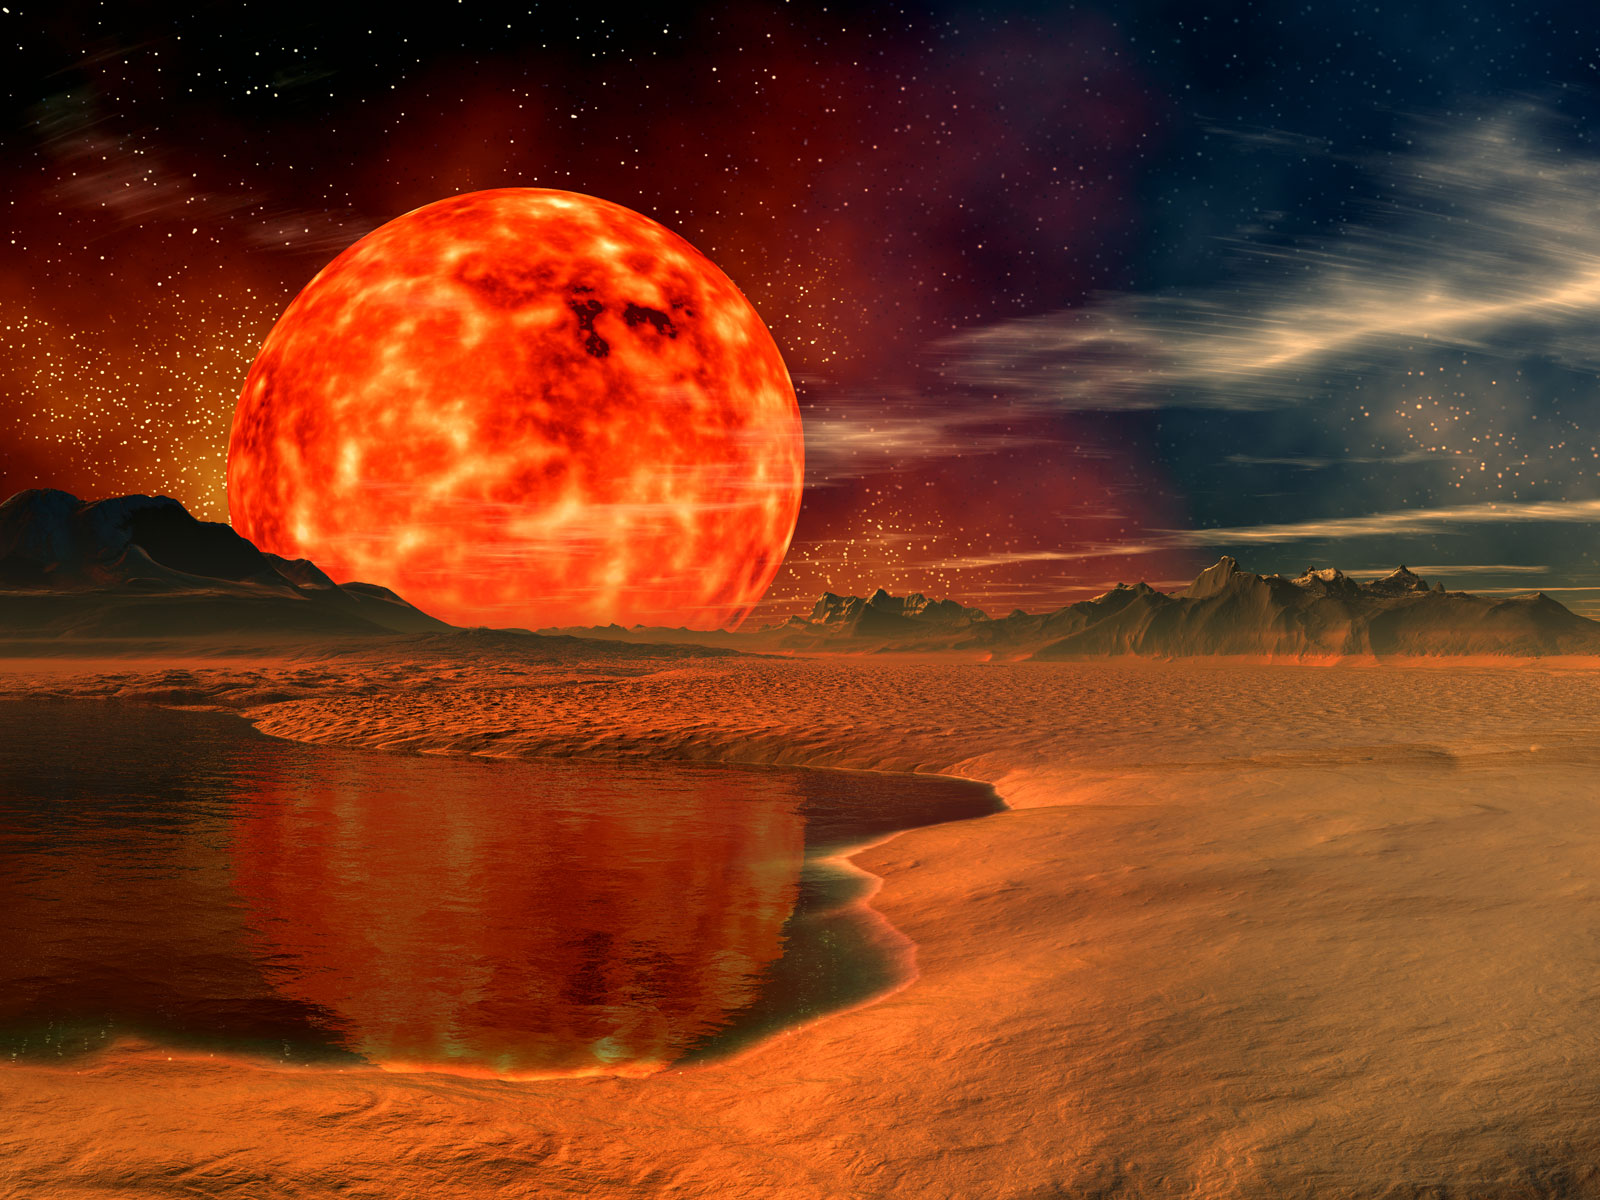 High-quality desktop wallpaper featuring a CGI burning orange moon above a lake in the desert.